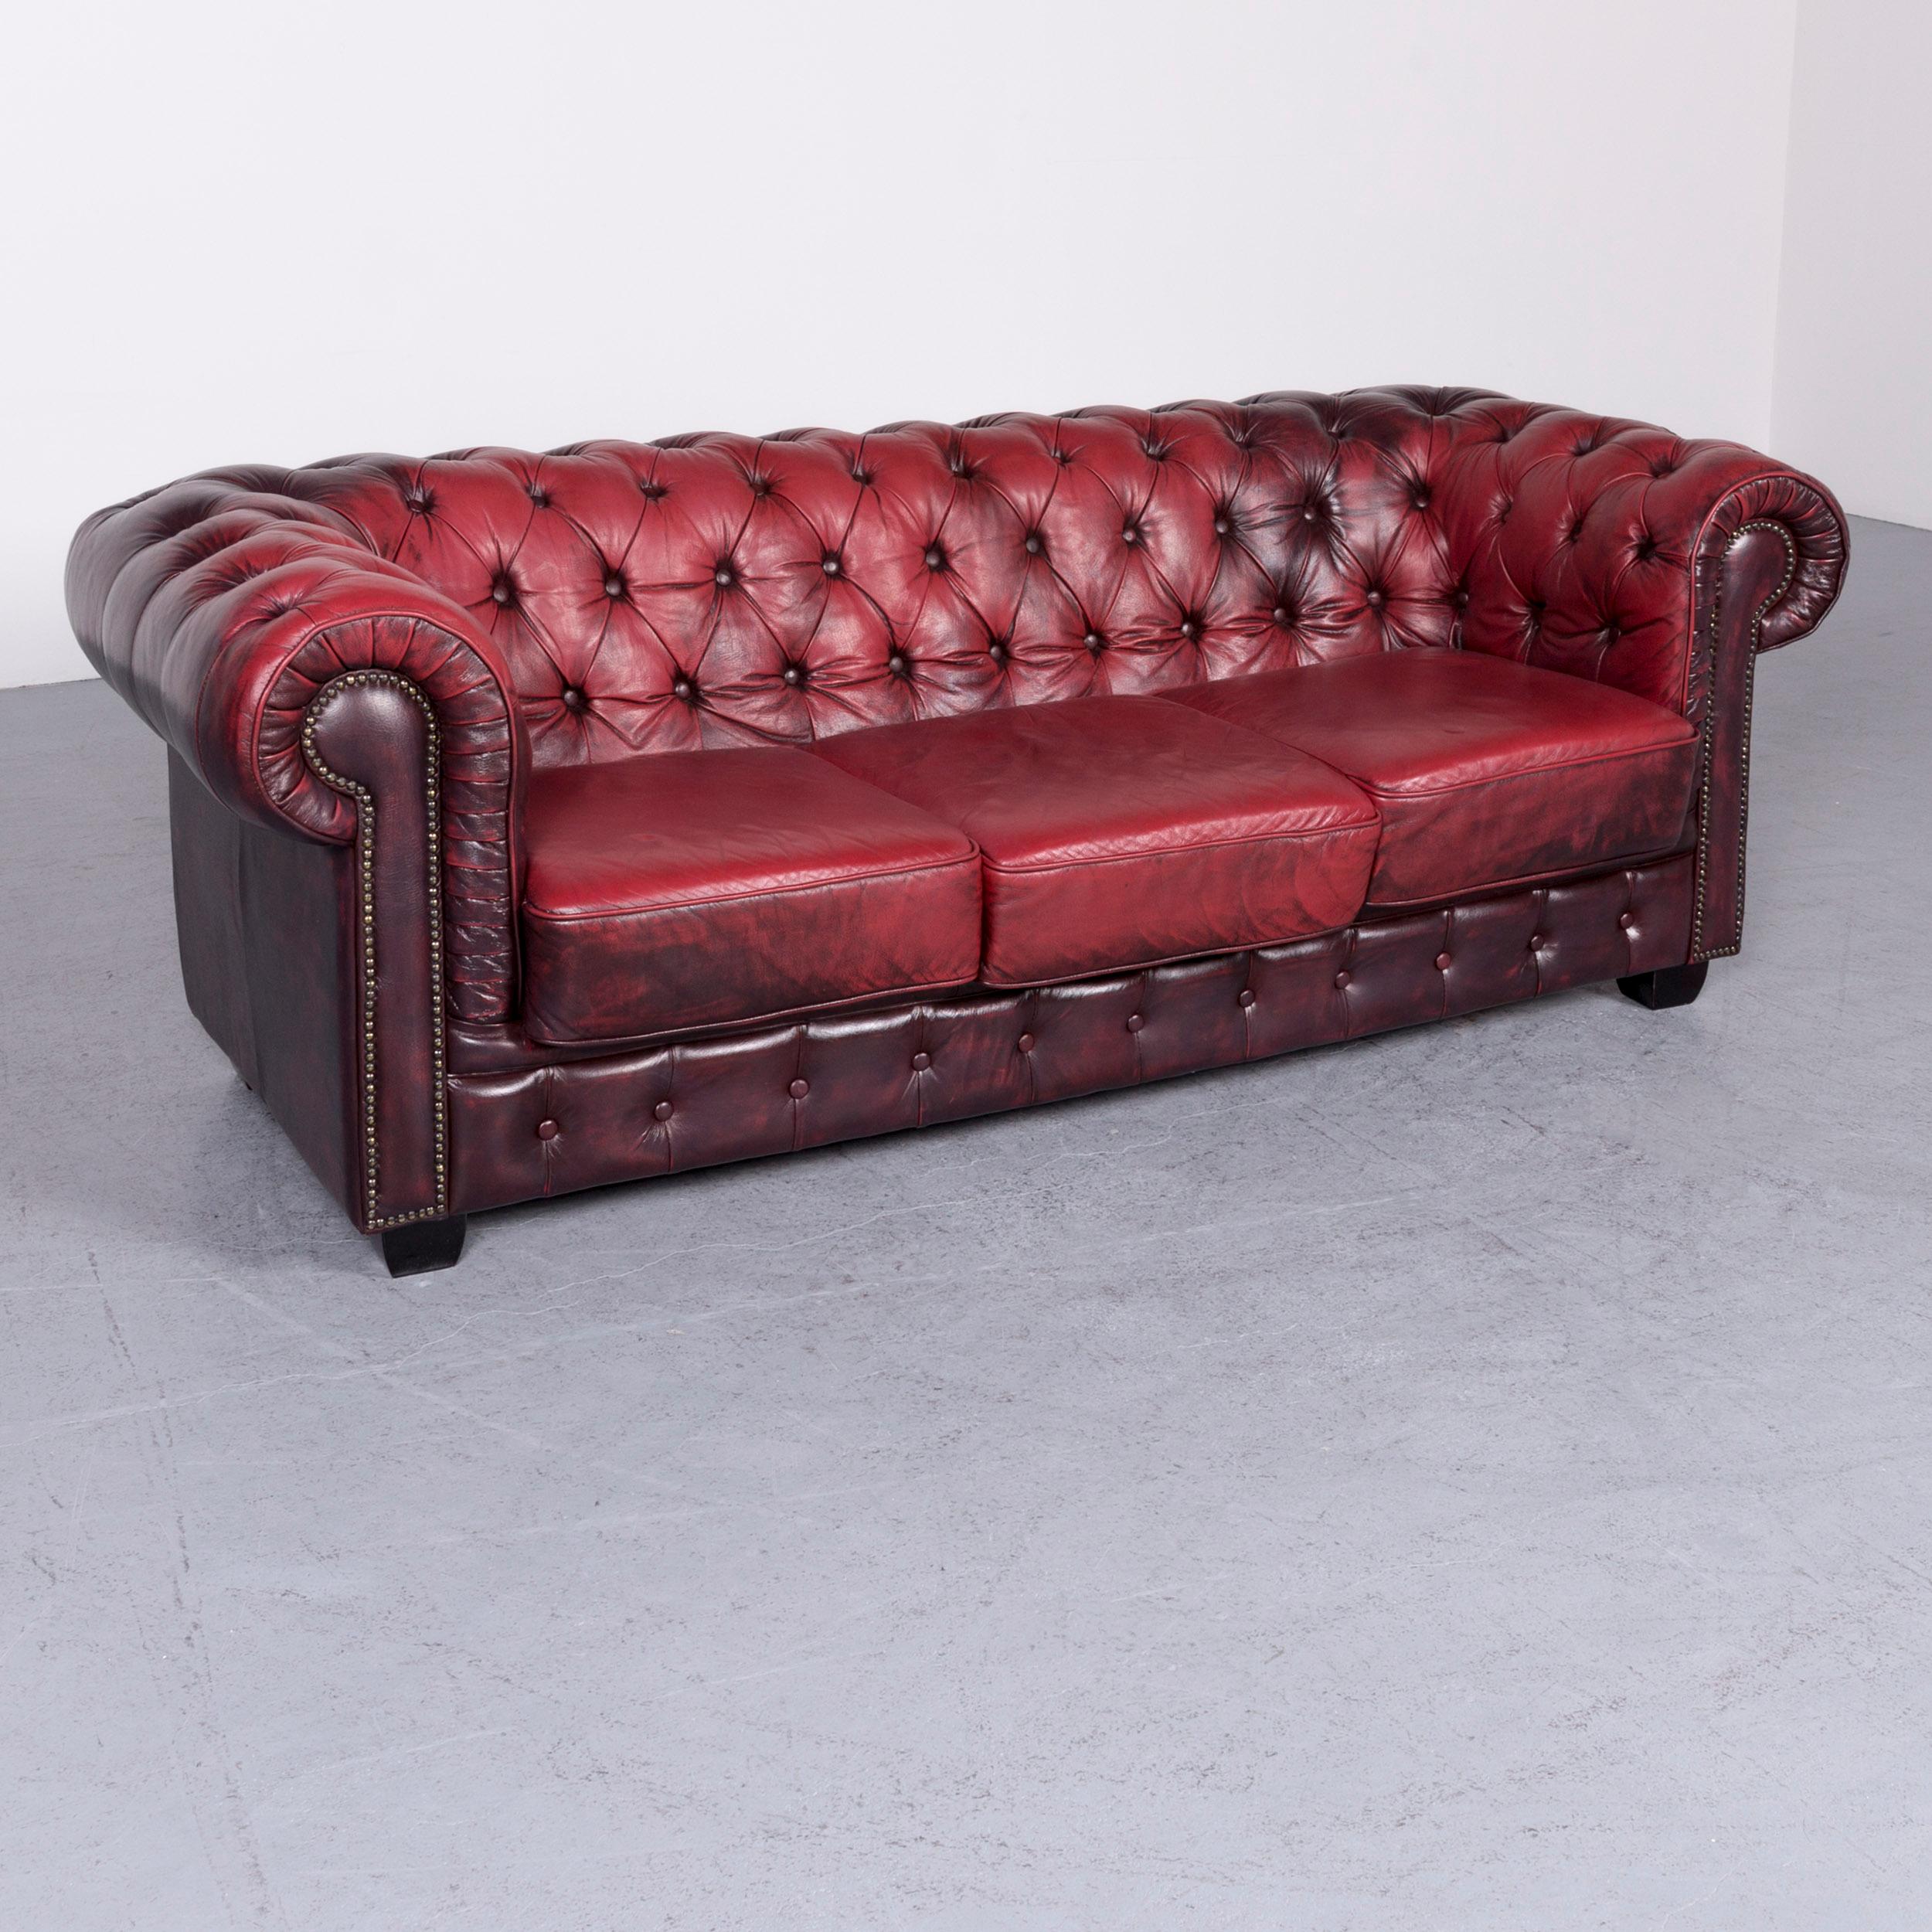 We bring to you a Chesterfield leather sofa red three-seat vintage couch.





























